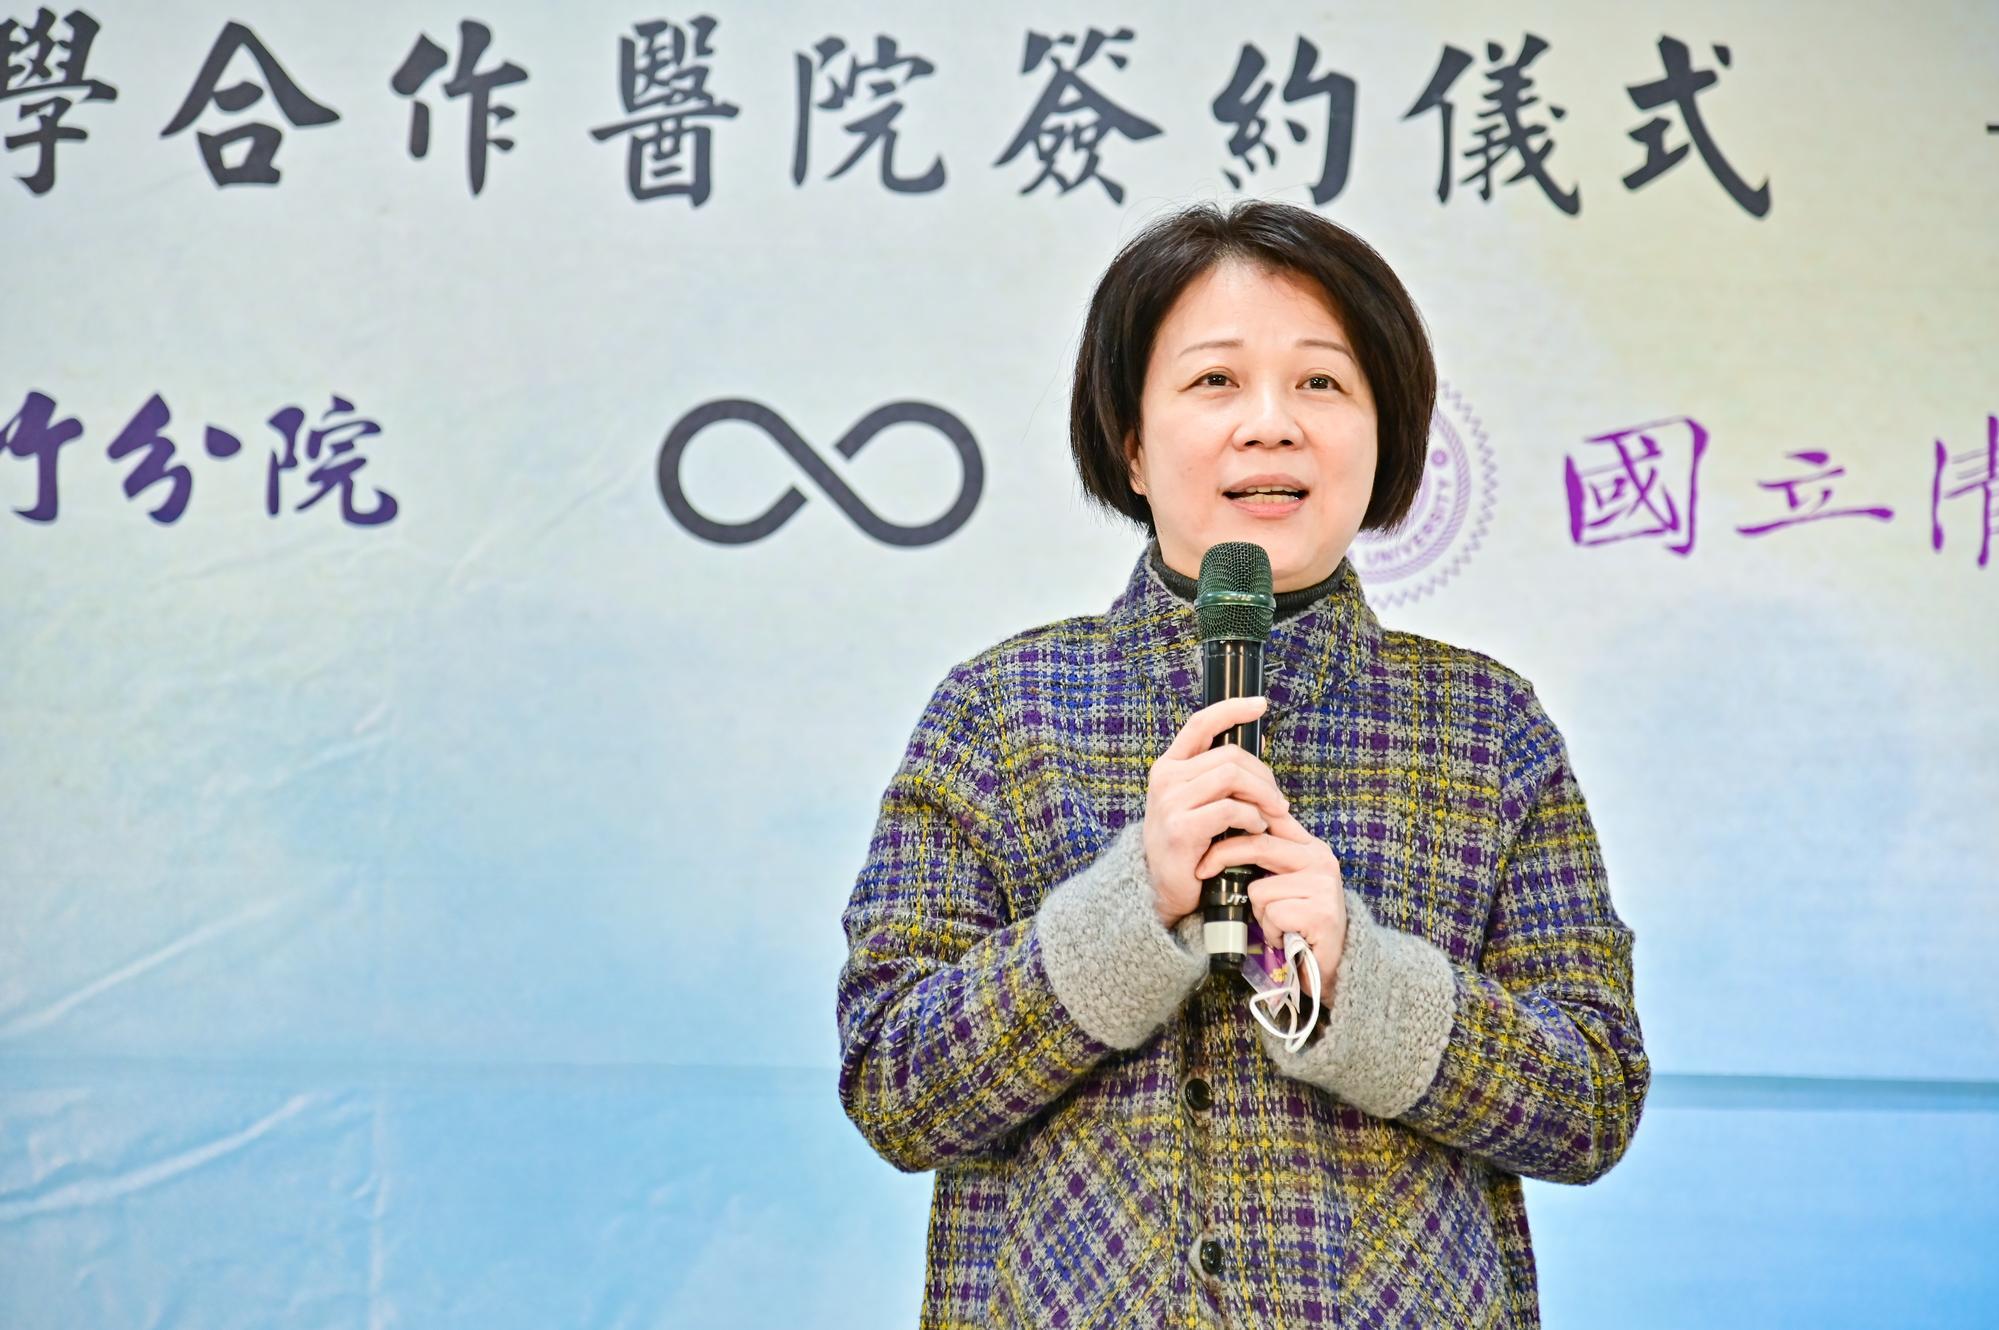 Chang Hui-yun said that the government's policy on medical care in rural areas aims at the continuous provision of quality medical care in remote localities, which makes smart technology all the more important.